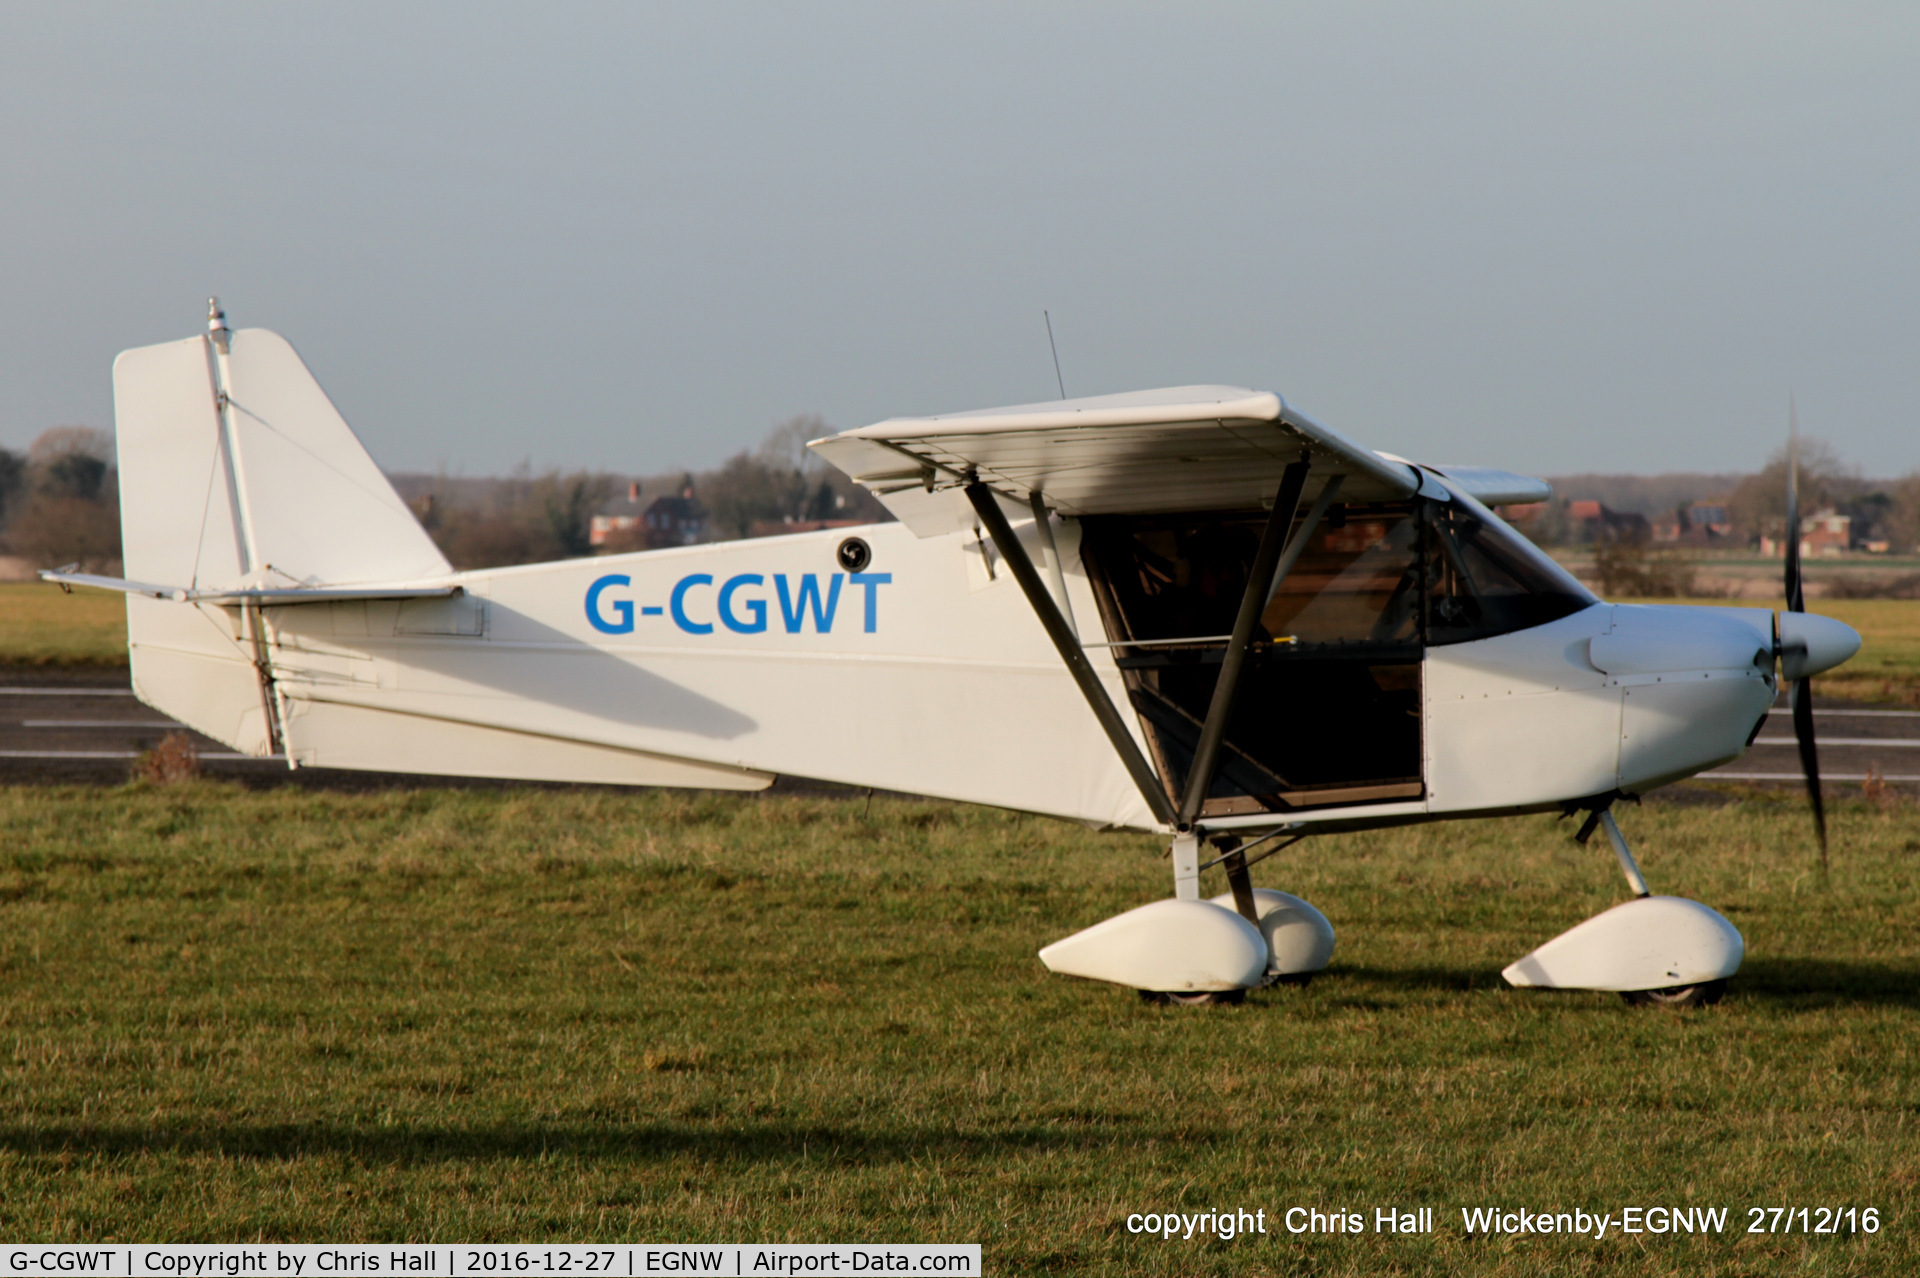 G-CGWT, 2008 Best Off SkyRanger Swift 912(1) C/N BMAA/HB/567, at the Wickenby 